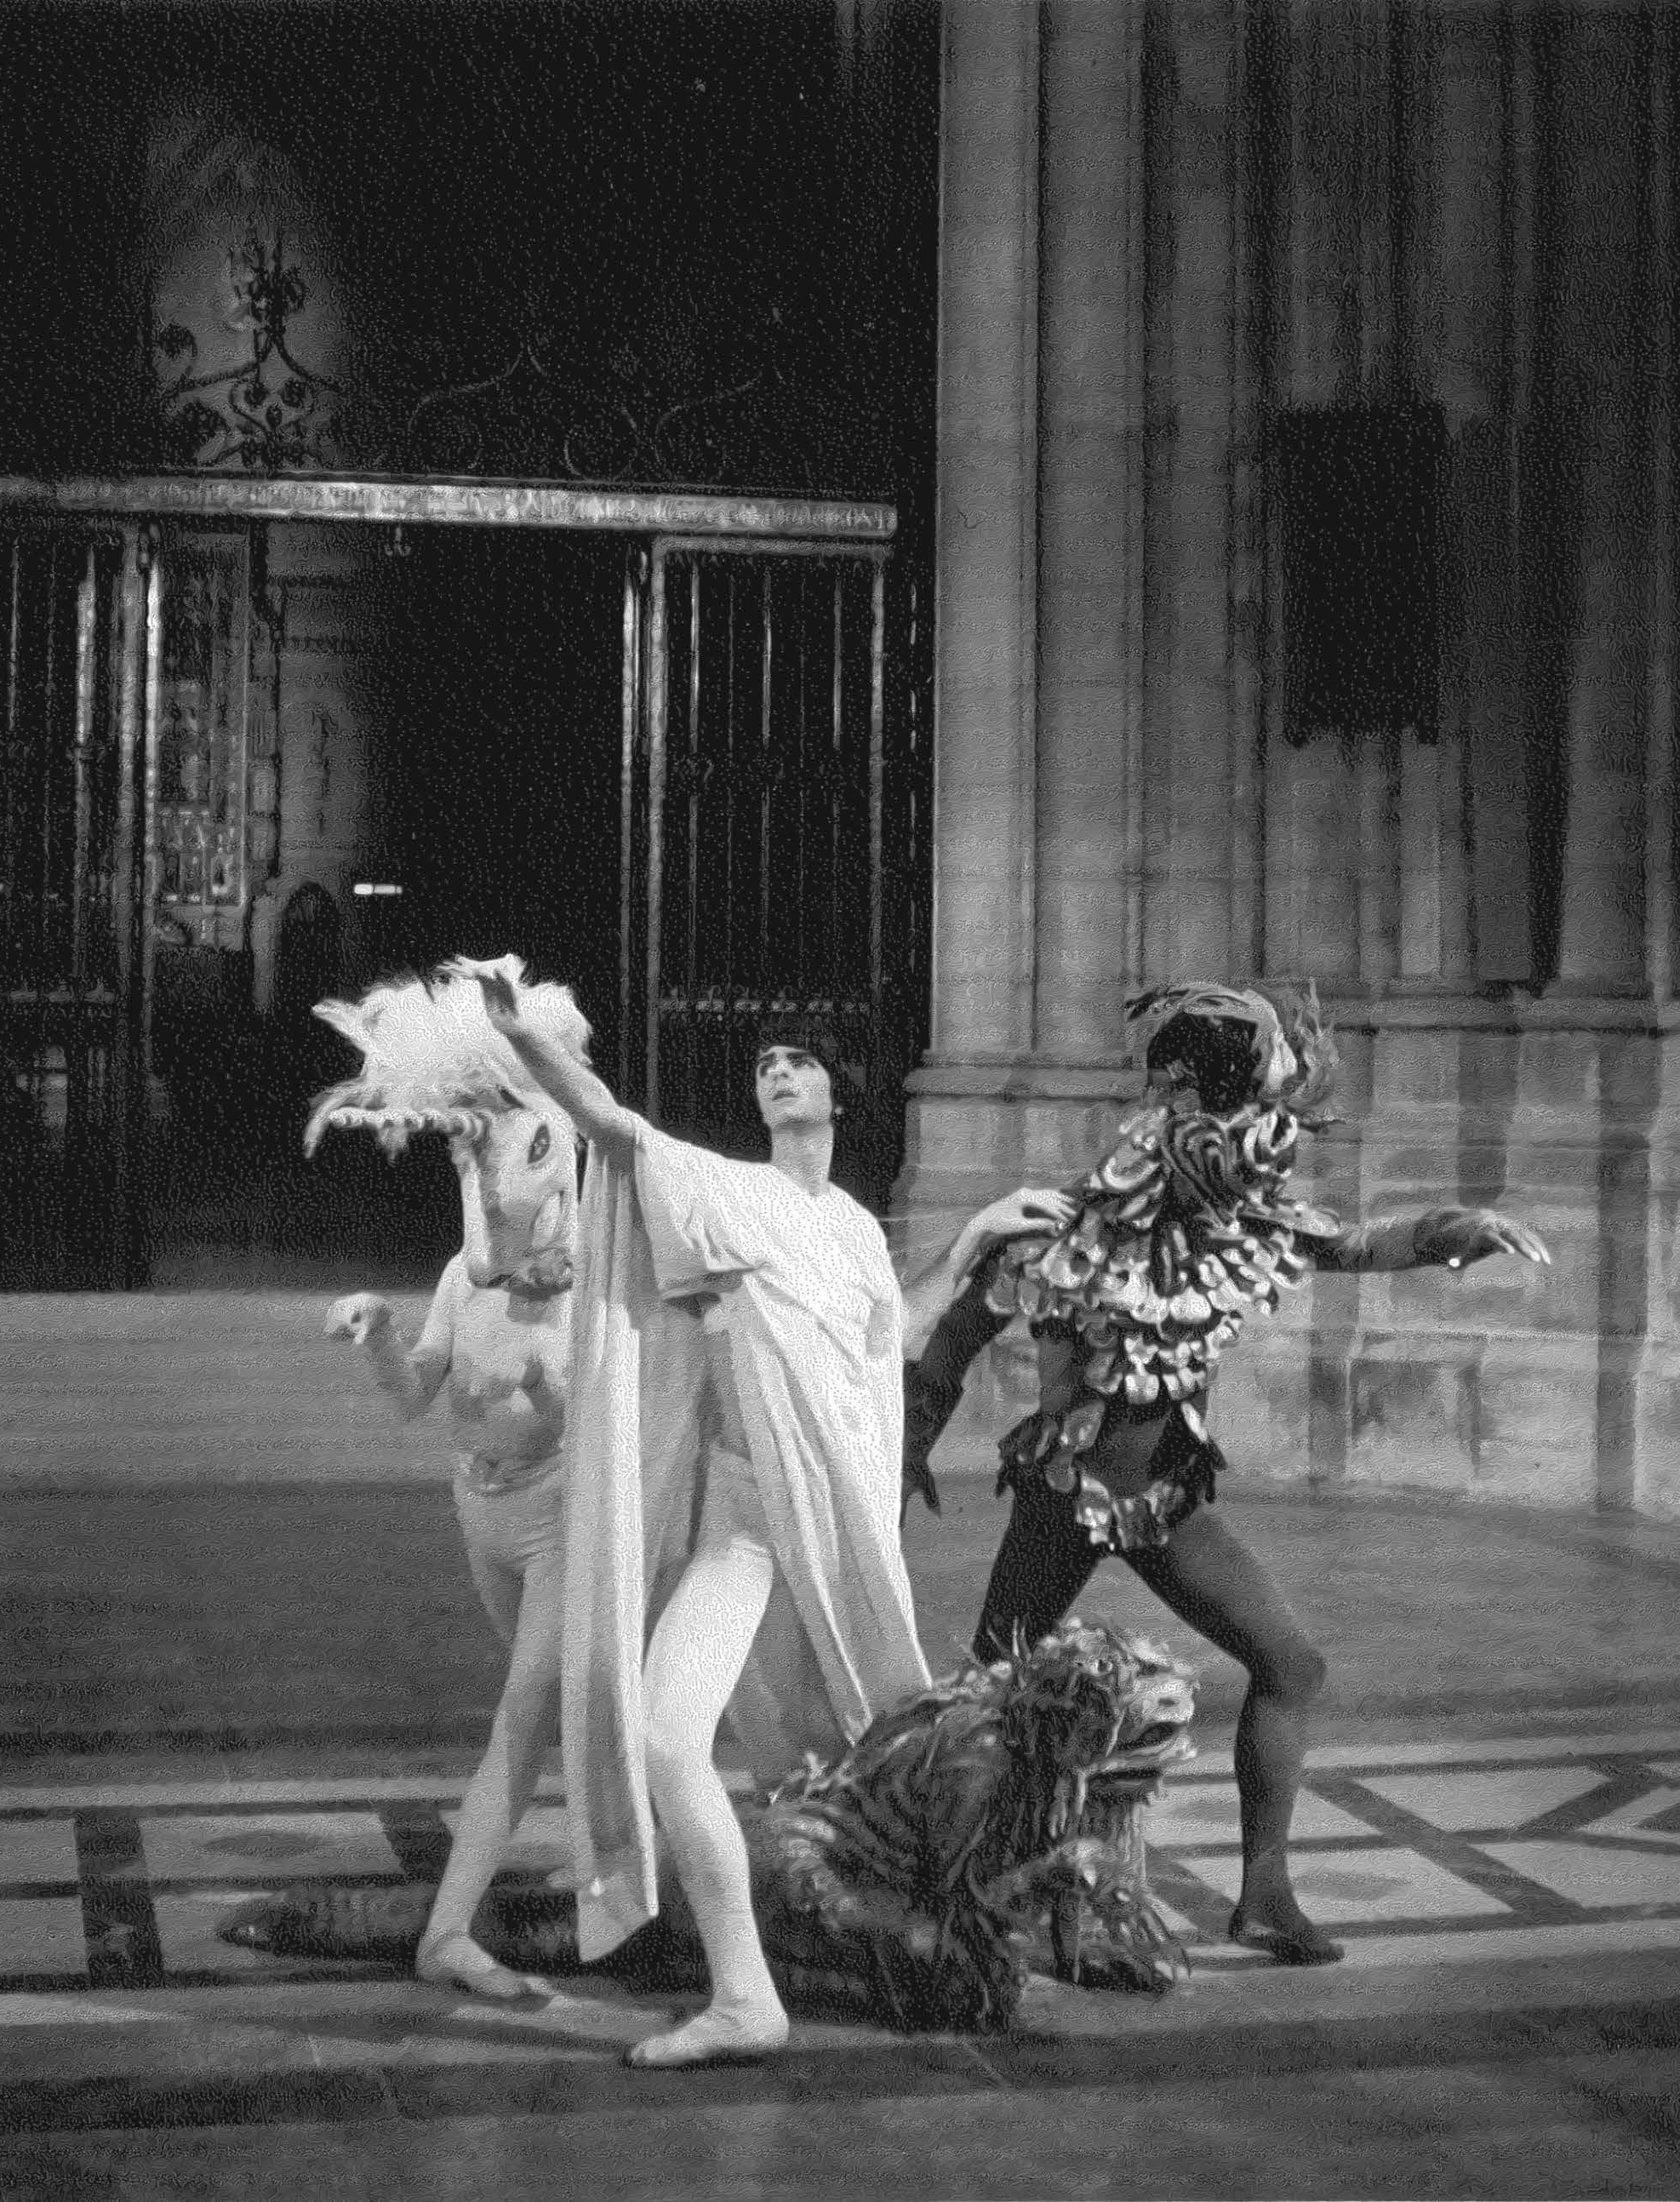 The Washington Ballet’s 1970 production of Gian Carlo Menotti’s “The Unicorn, the Gorgon, and the Manticore” at the National Cathedral. Photograph courtesy of The Historical Society of Washington, D.C.